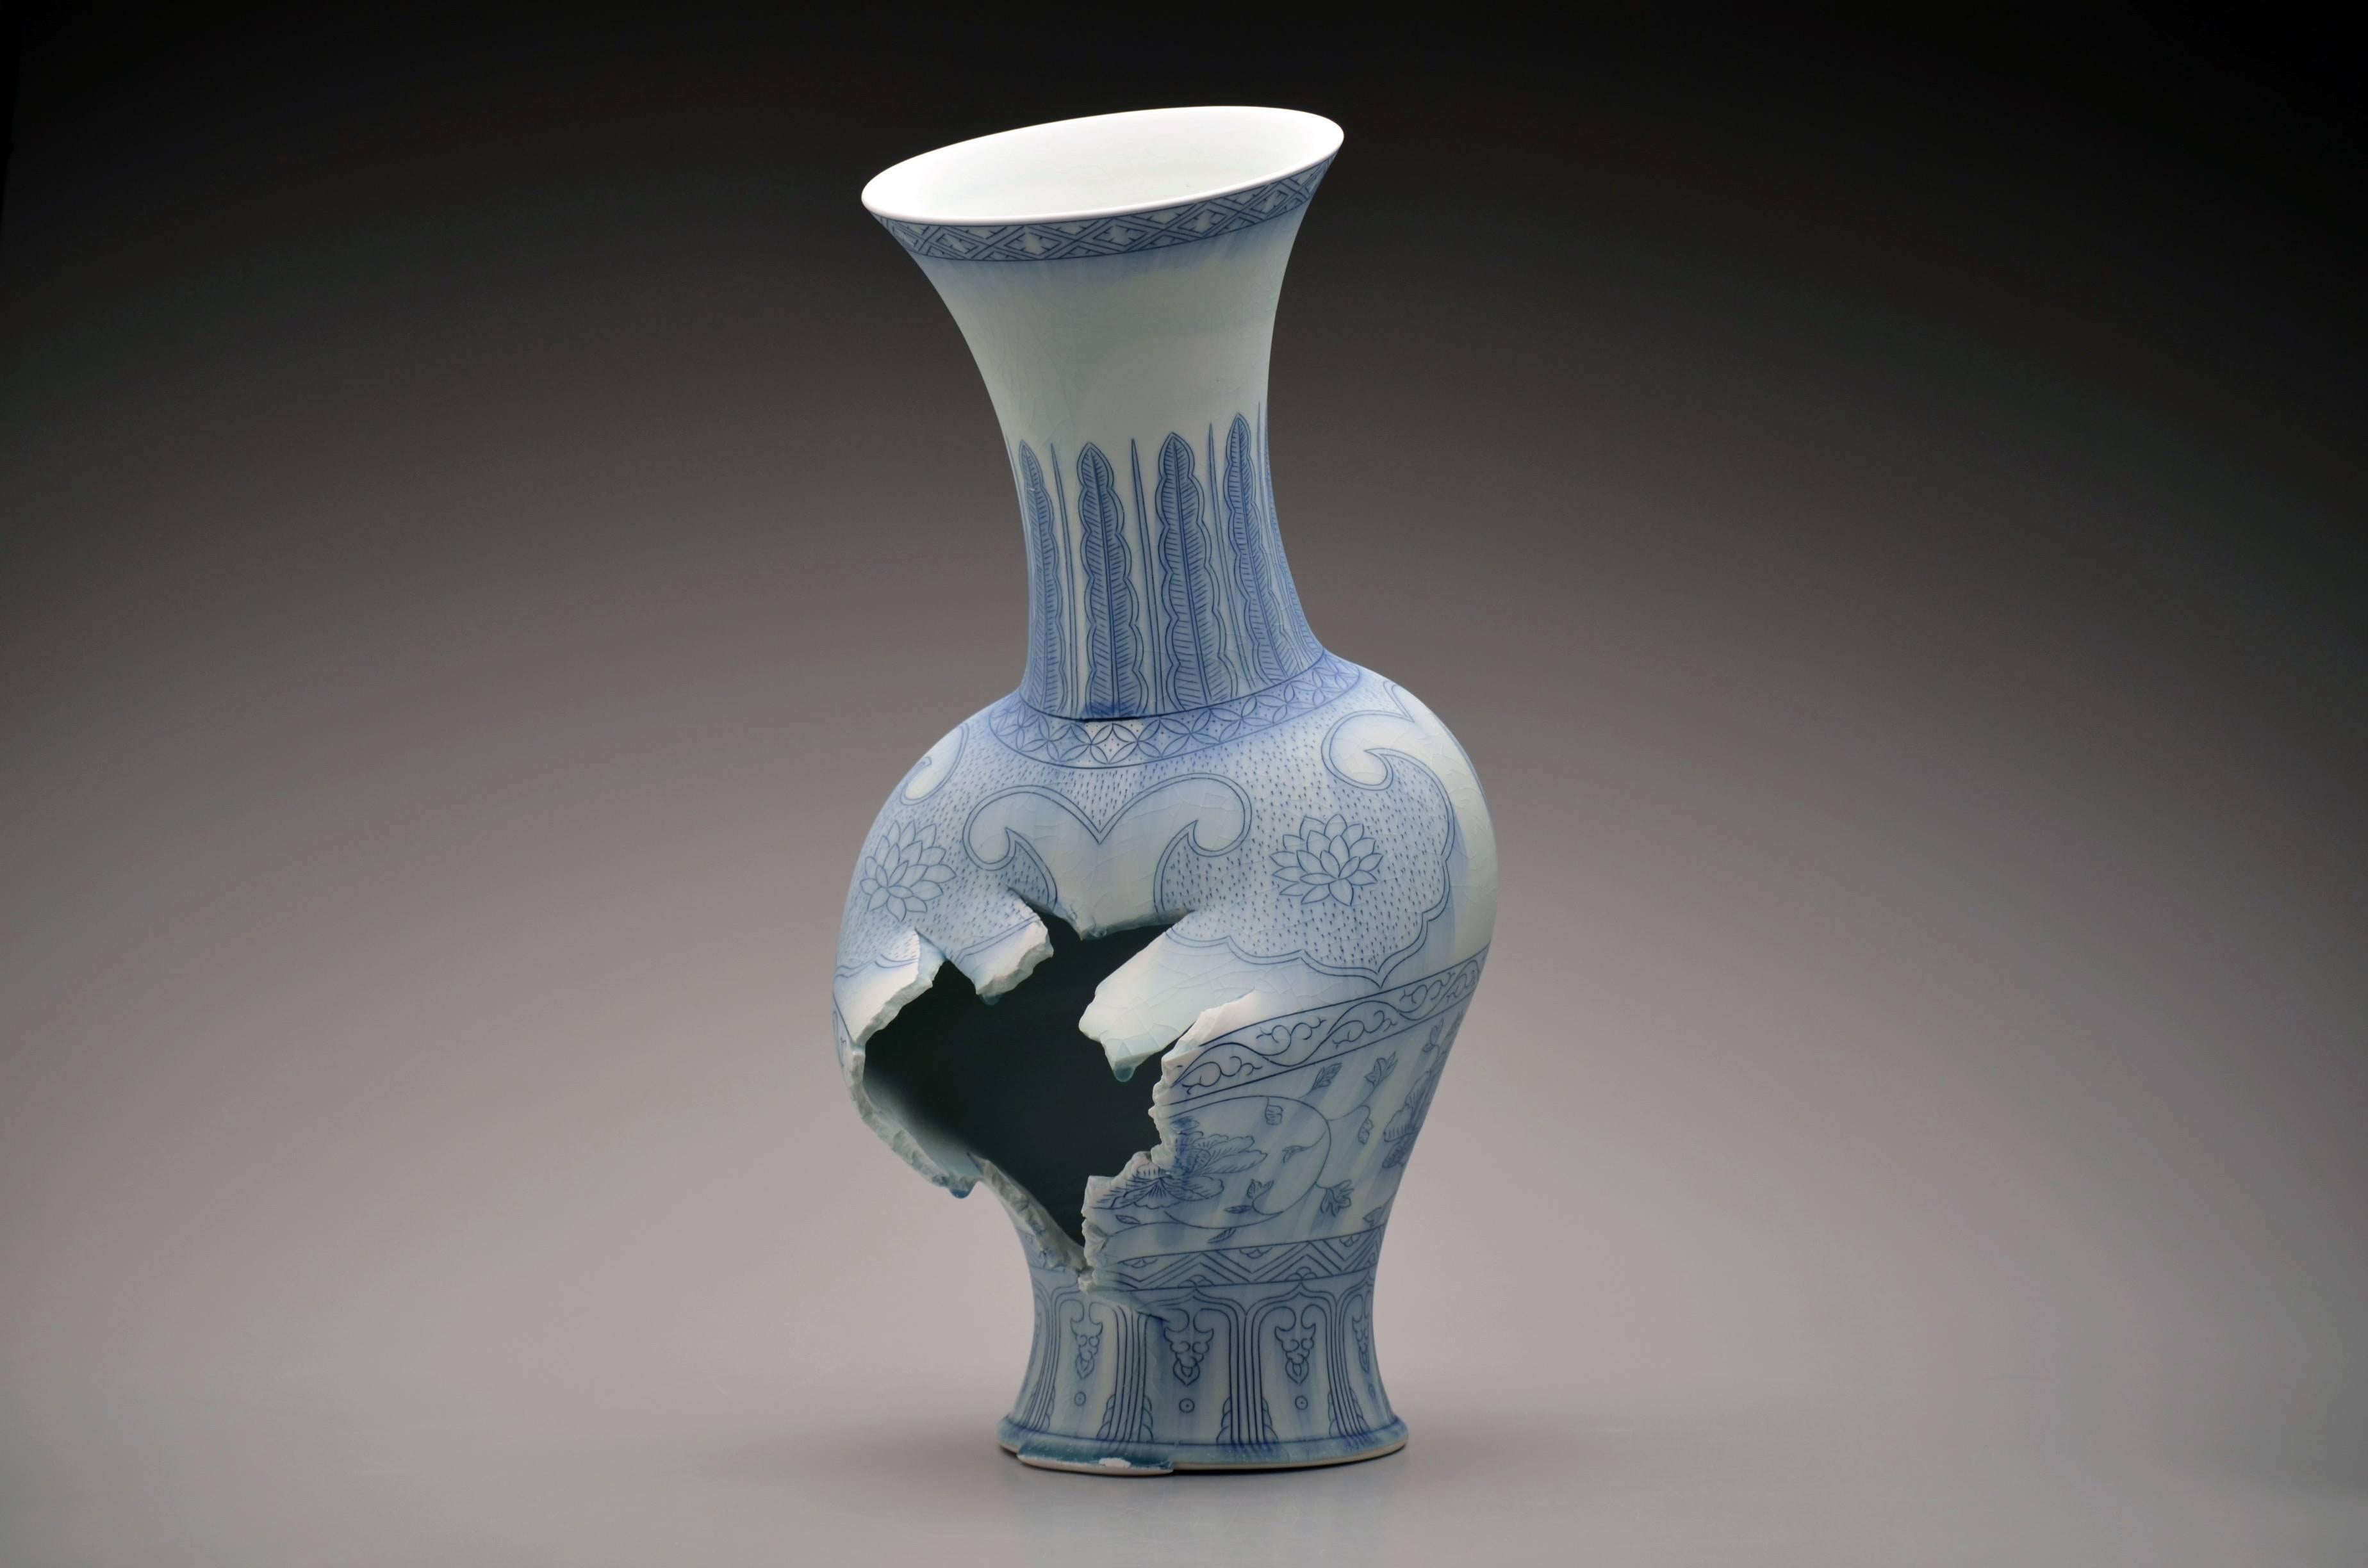 References to ancient Asian porcelain vase forms with occasional contemporary references abound in the drawing and form of Lee's work. Allowing the form, itself, to deconstruct in an act that is both artistically planned and random through the